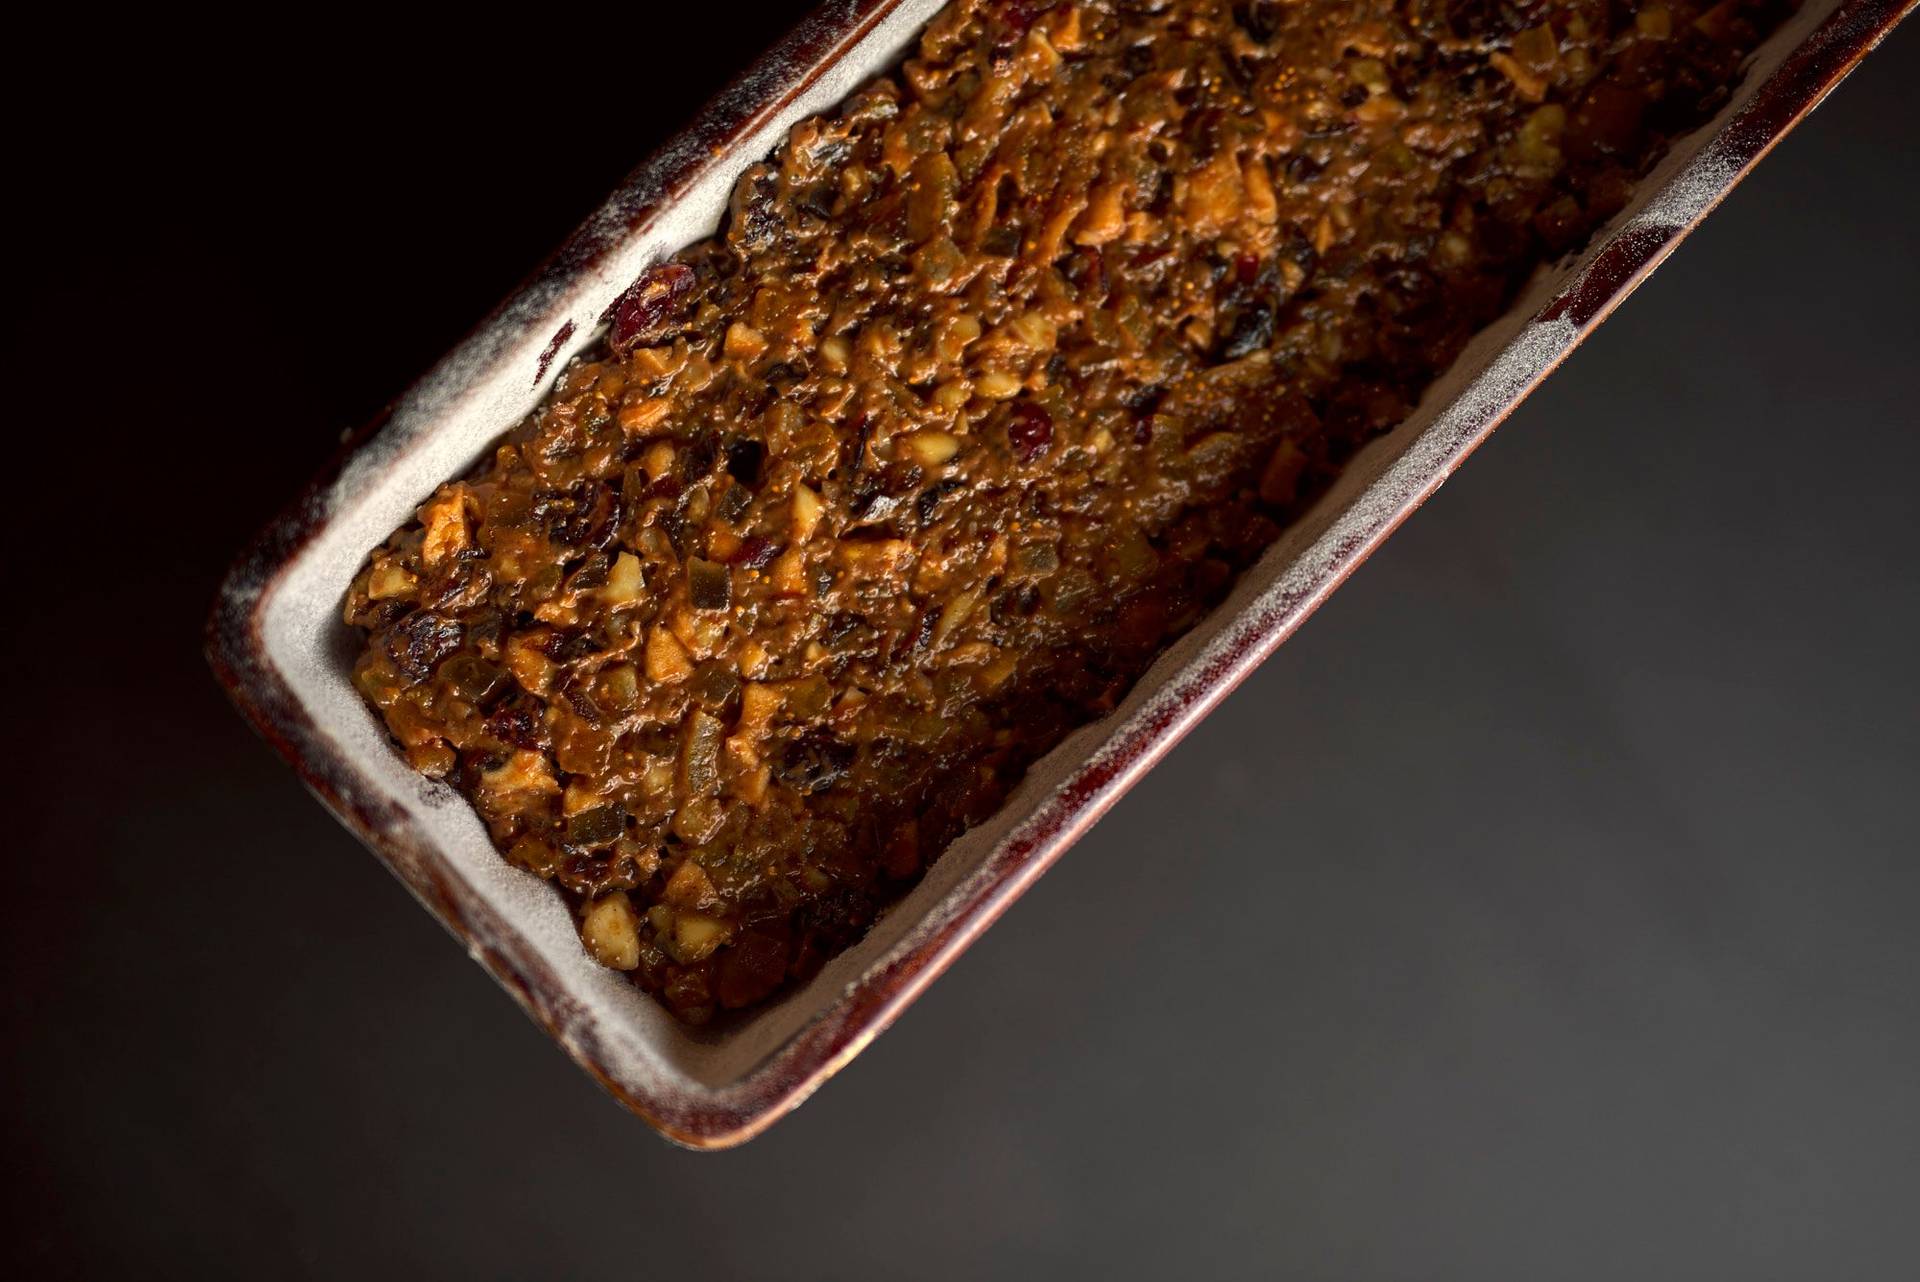 raw fruit cake in a vintage baking pan with black background